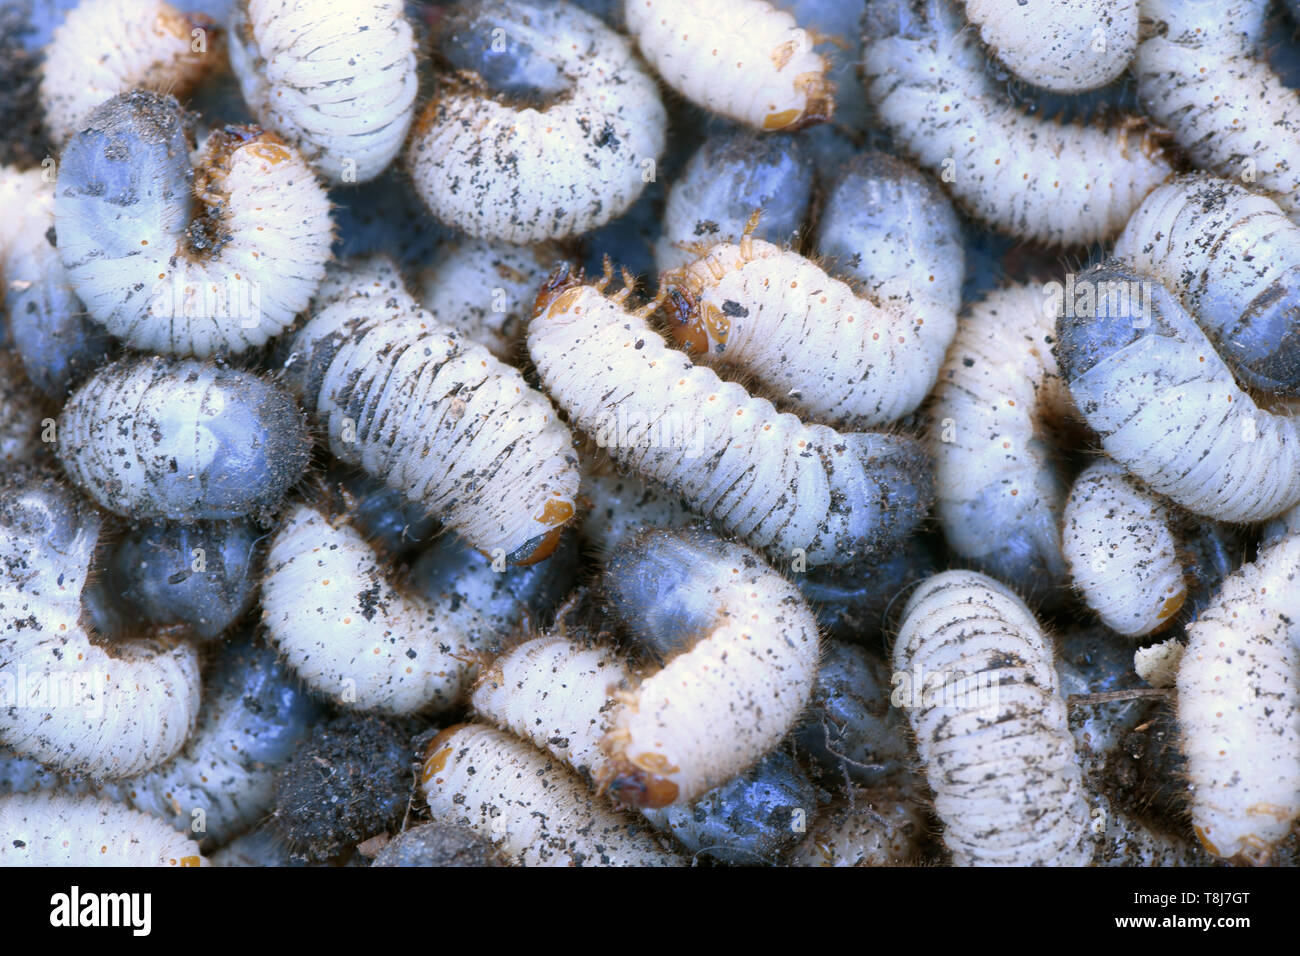 Background of  larva of a may beetle (Melolontha). High resolution photo Stock Photo